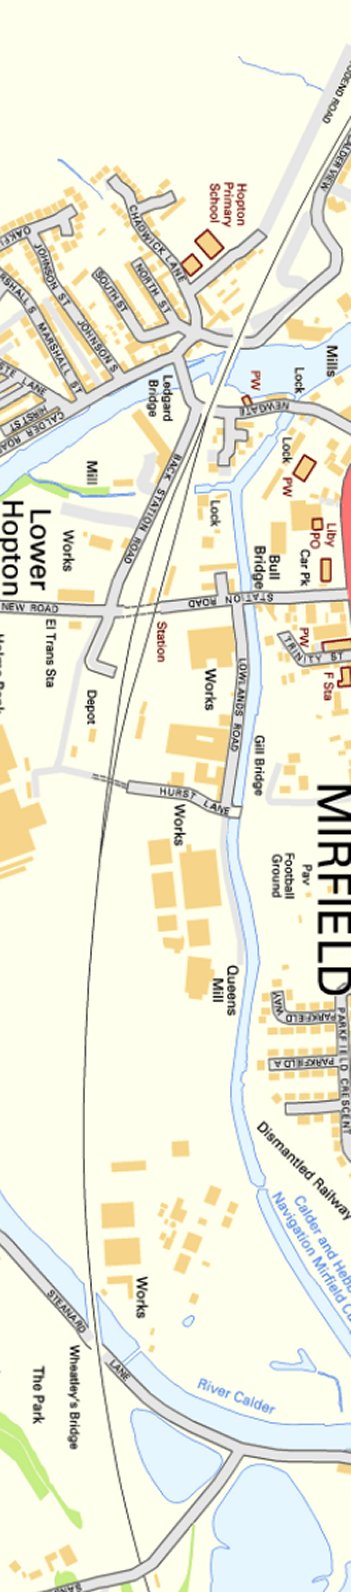 Section from Ordnance Survey OpenSource mapping 2013 showing L&YR railway line at Mirfield railway station